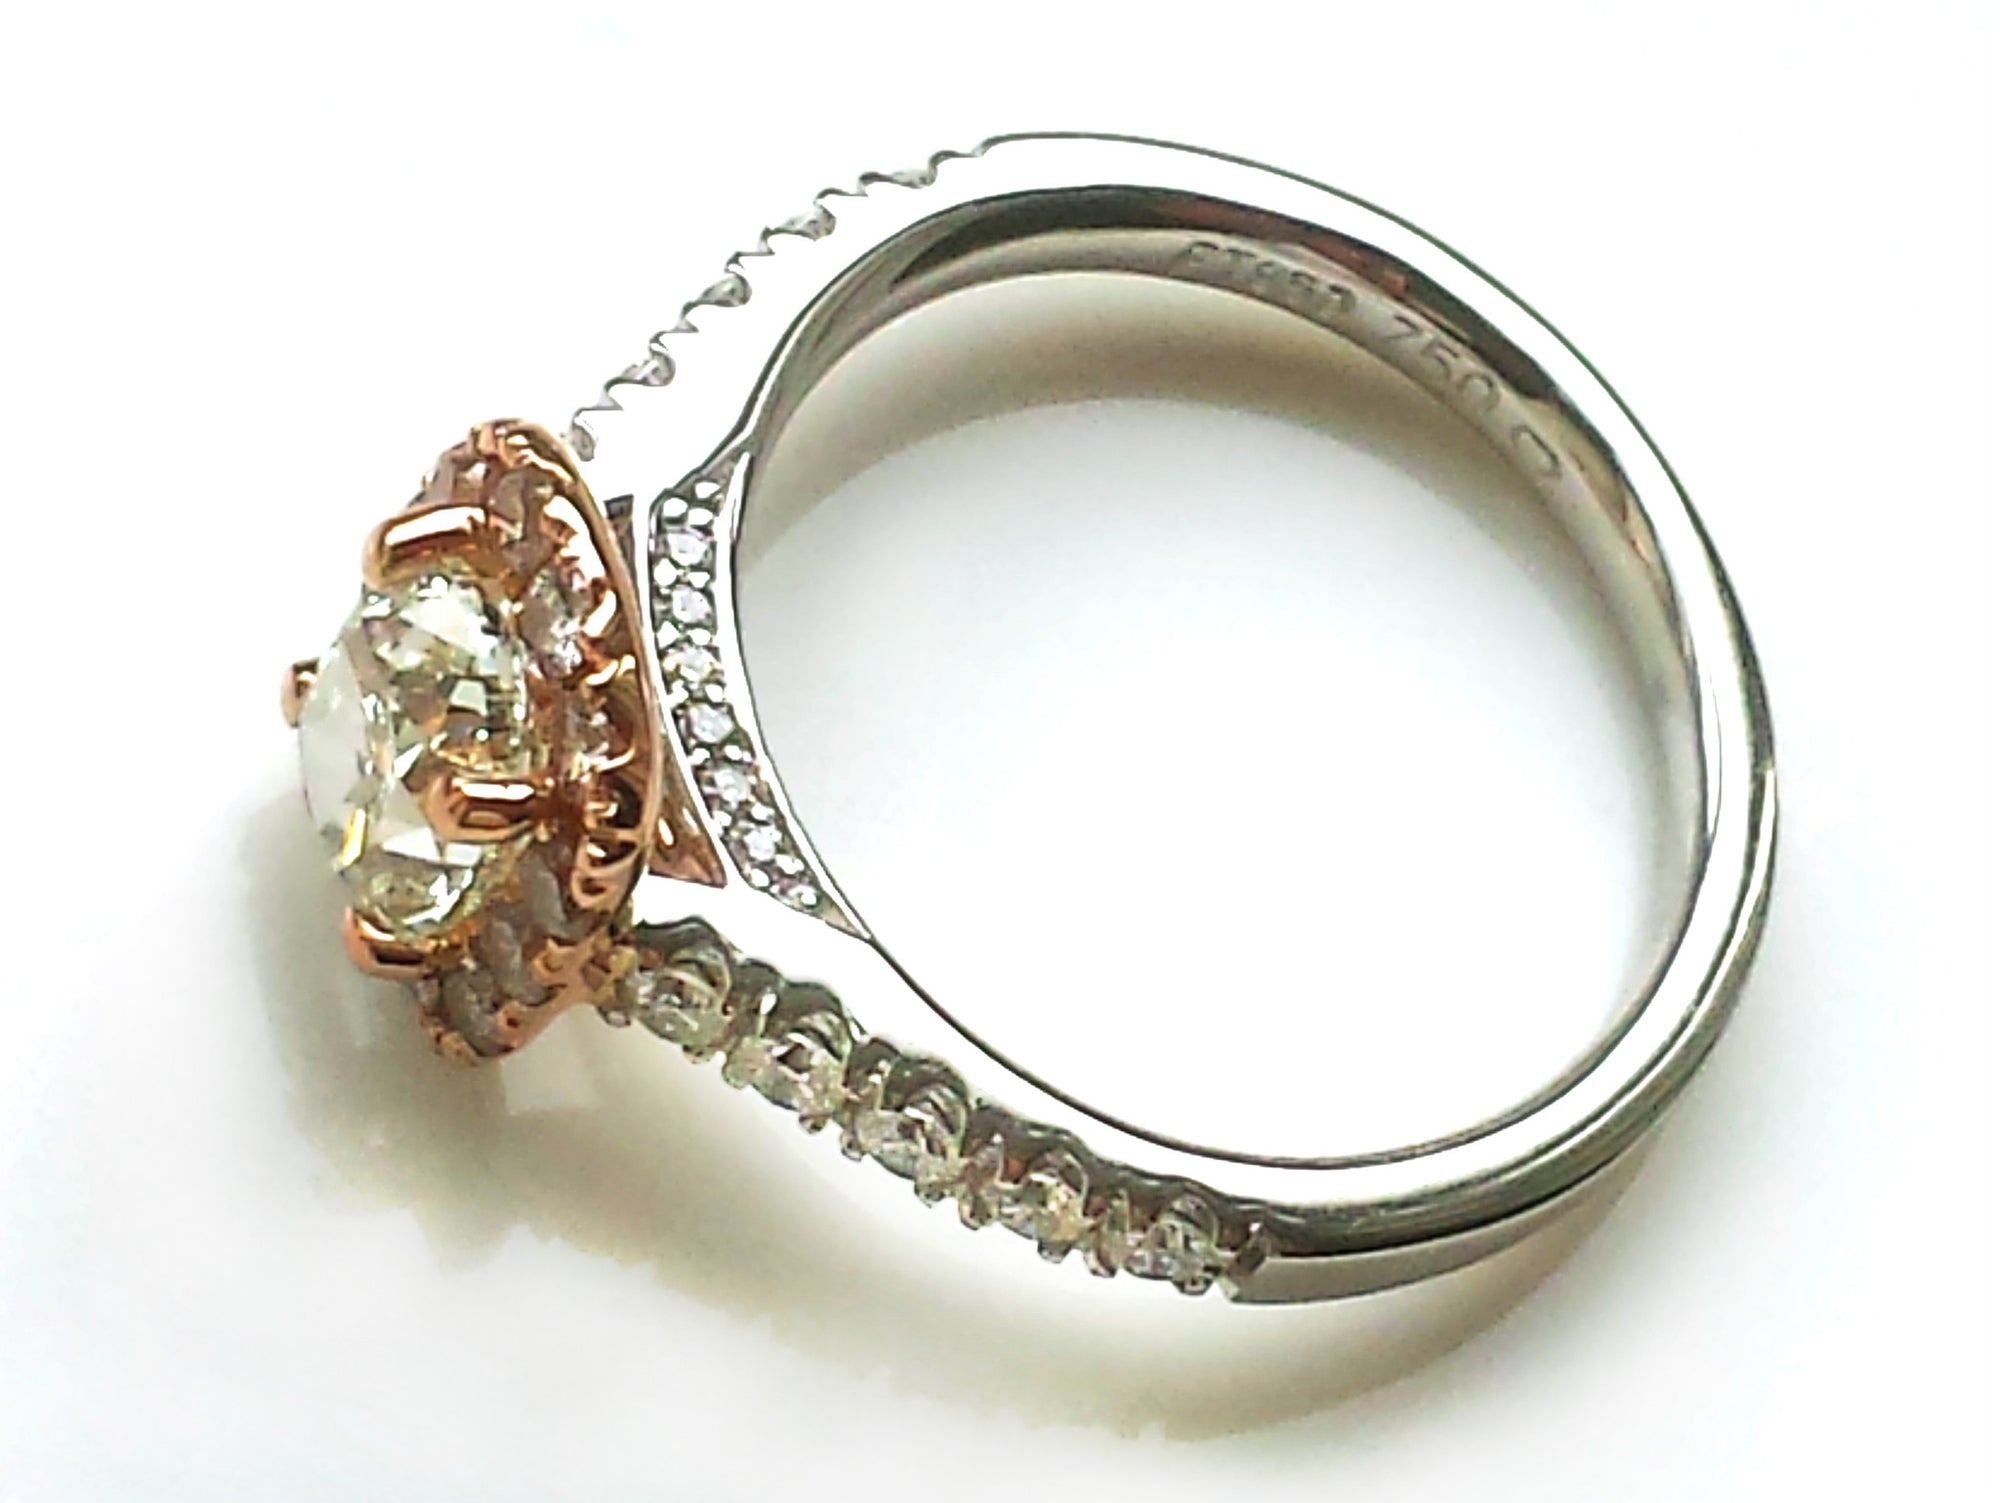 Natural Green 1.7ct VVS2 Diamond 'Soleste' Engagement Ring with Pink Diamond Halo set in Rose Gold & Platinum